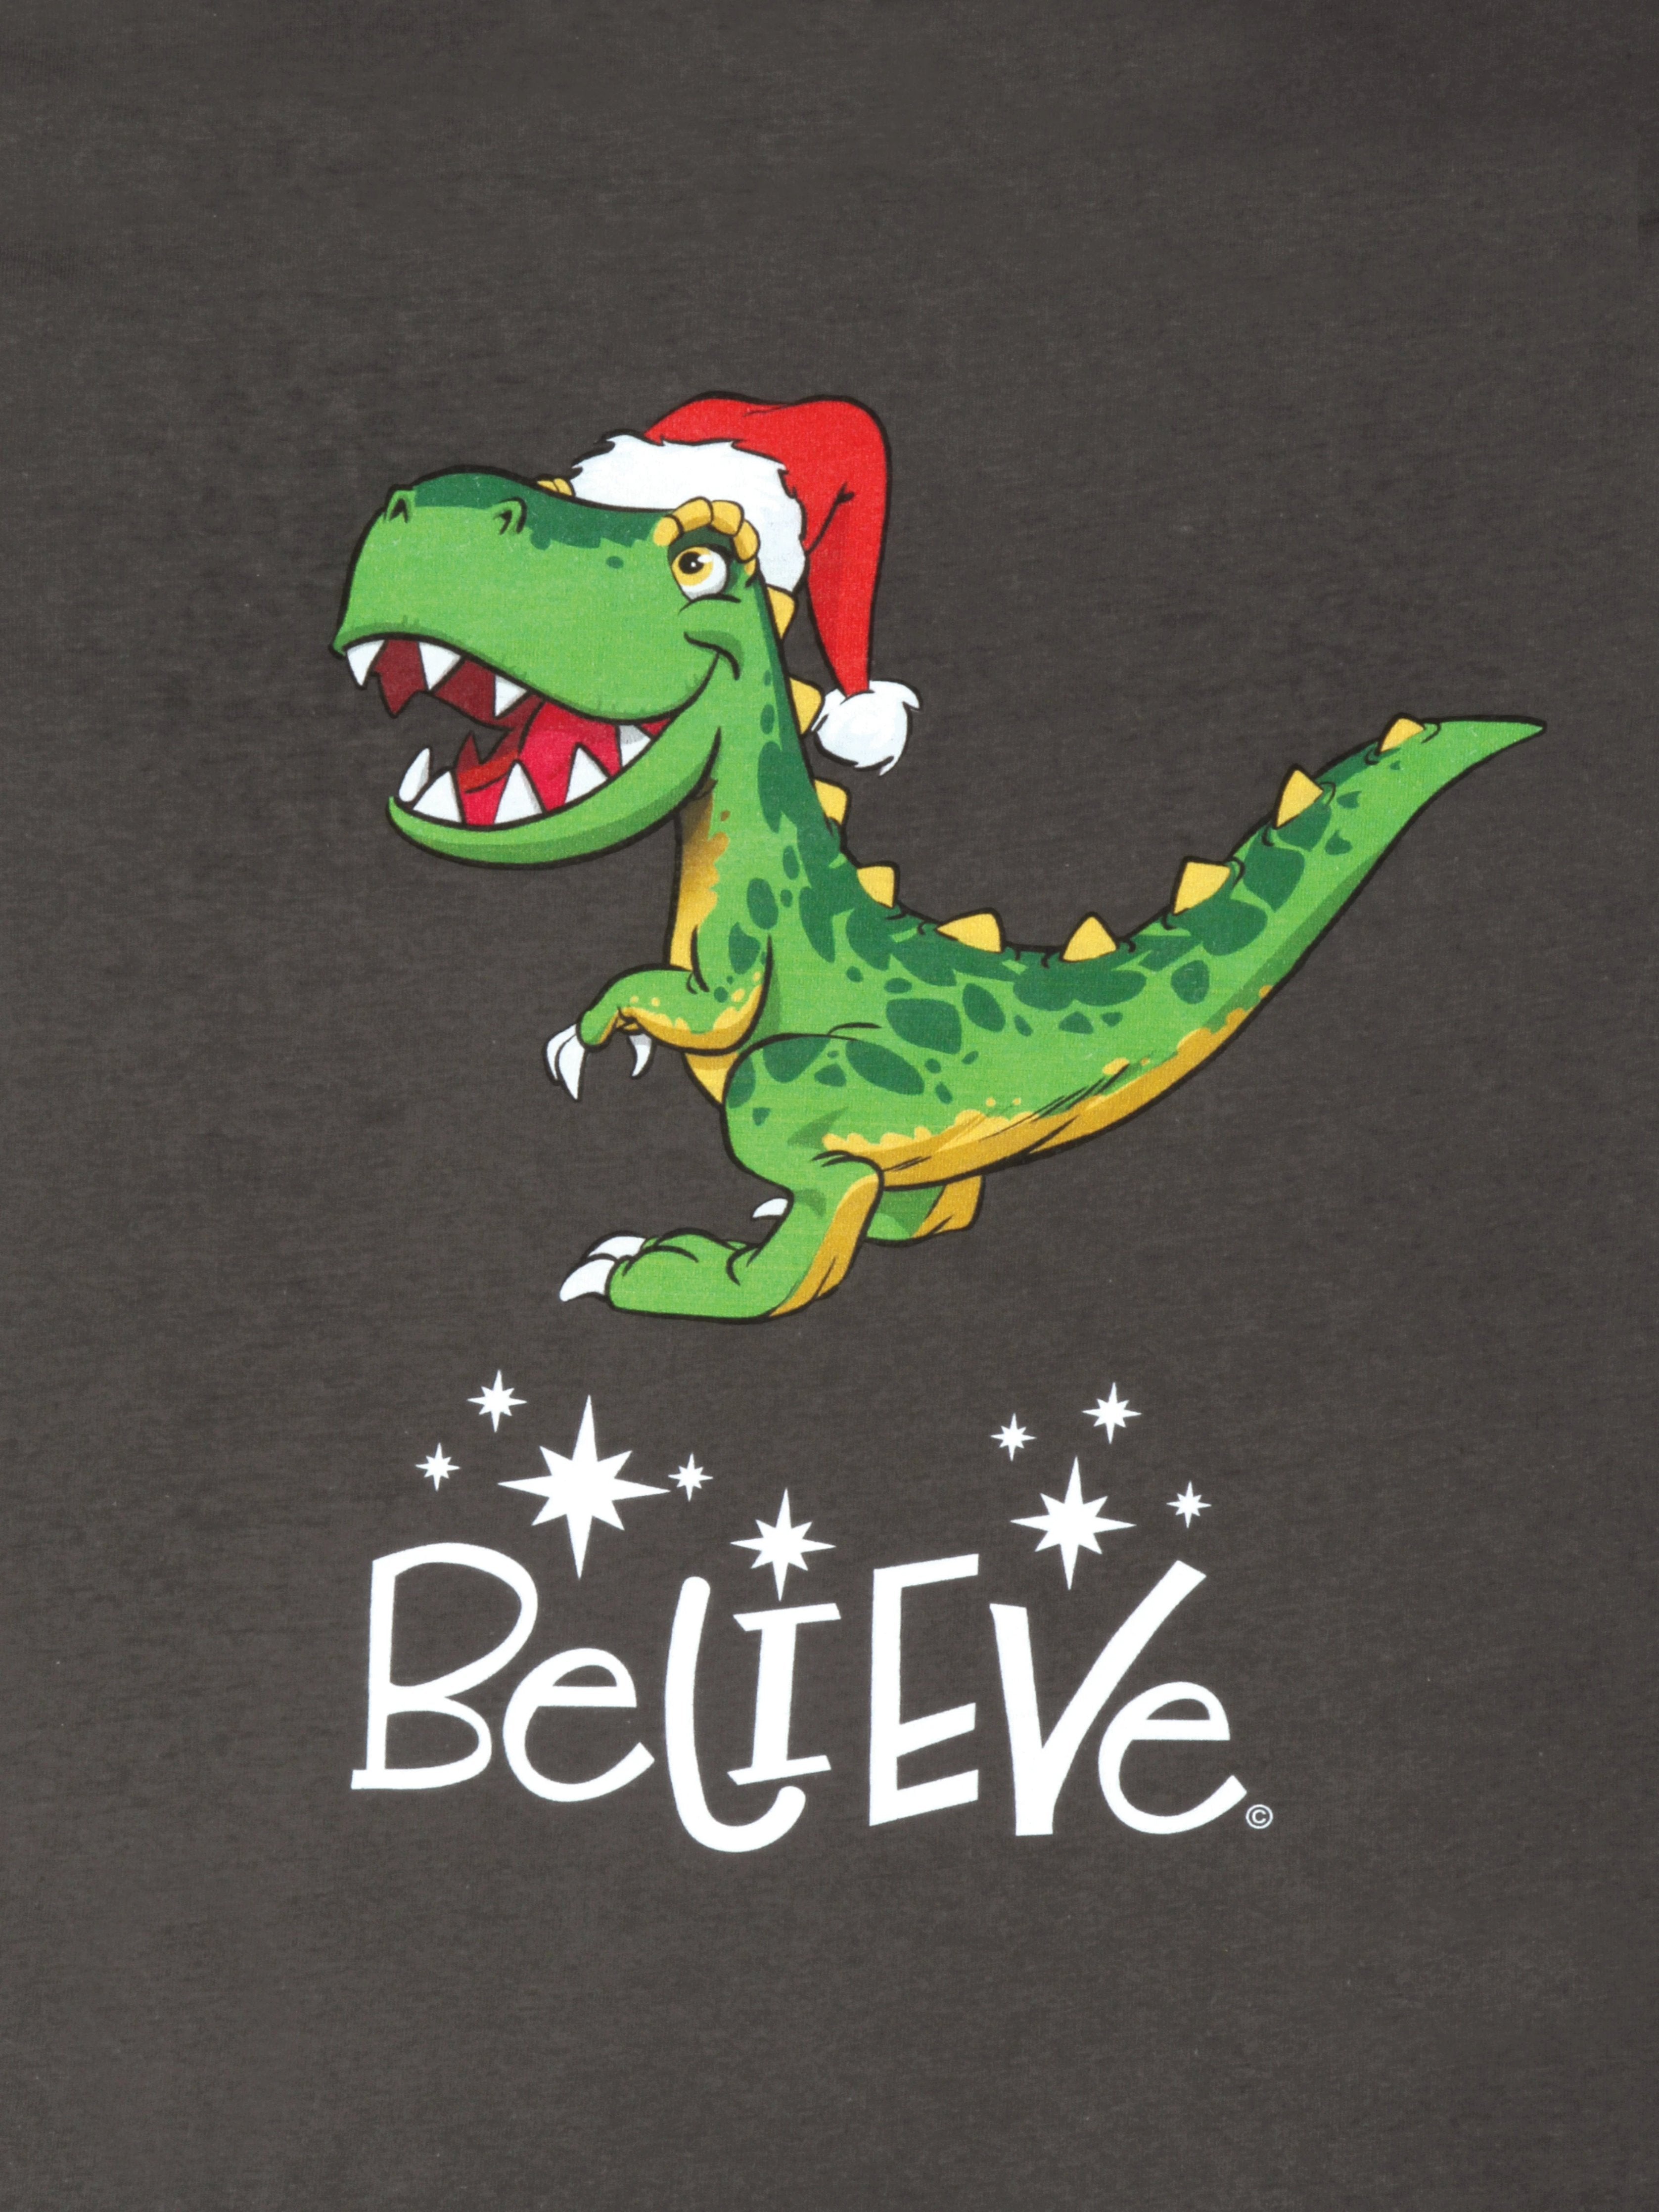 T-Rex_Believe_100%_Cotton_Adult_s_Holiday